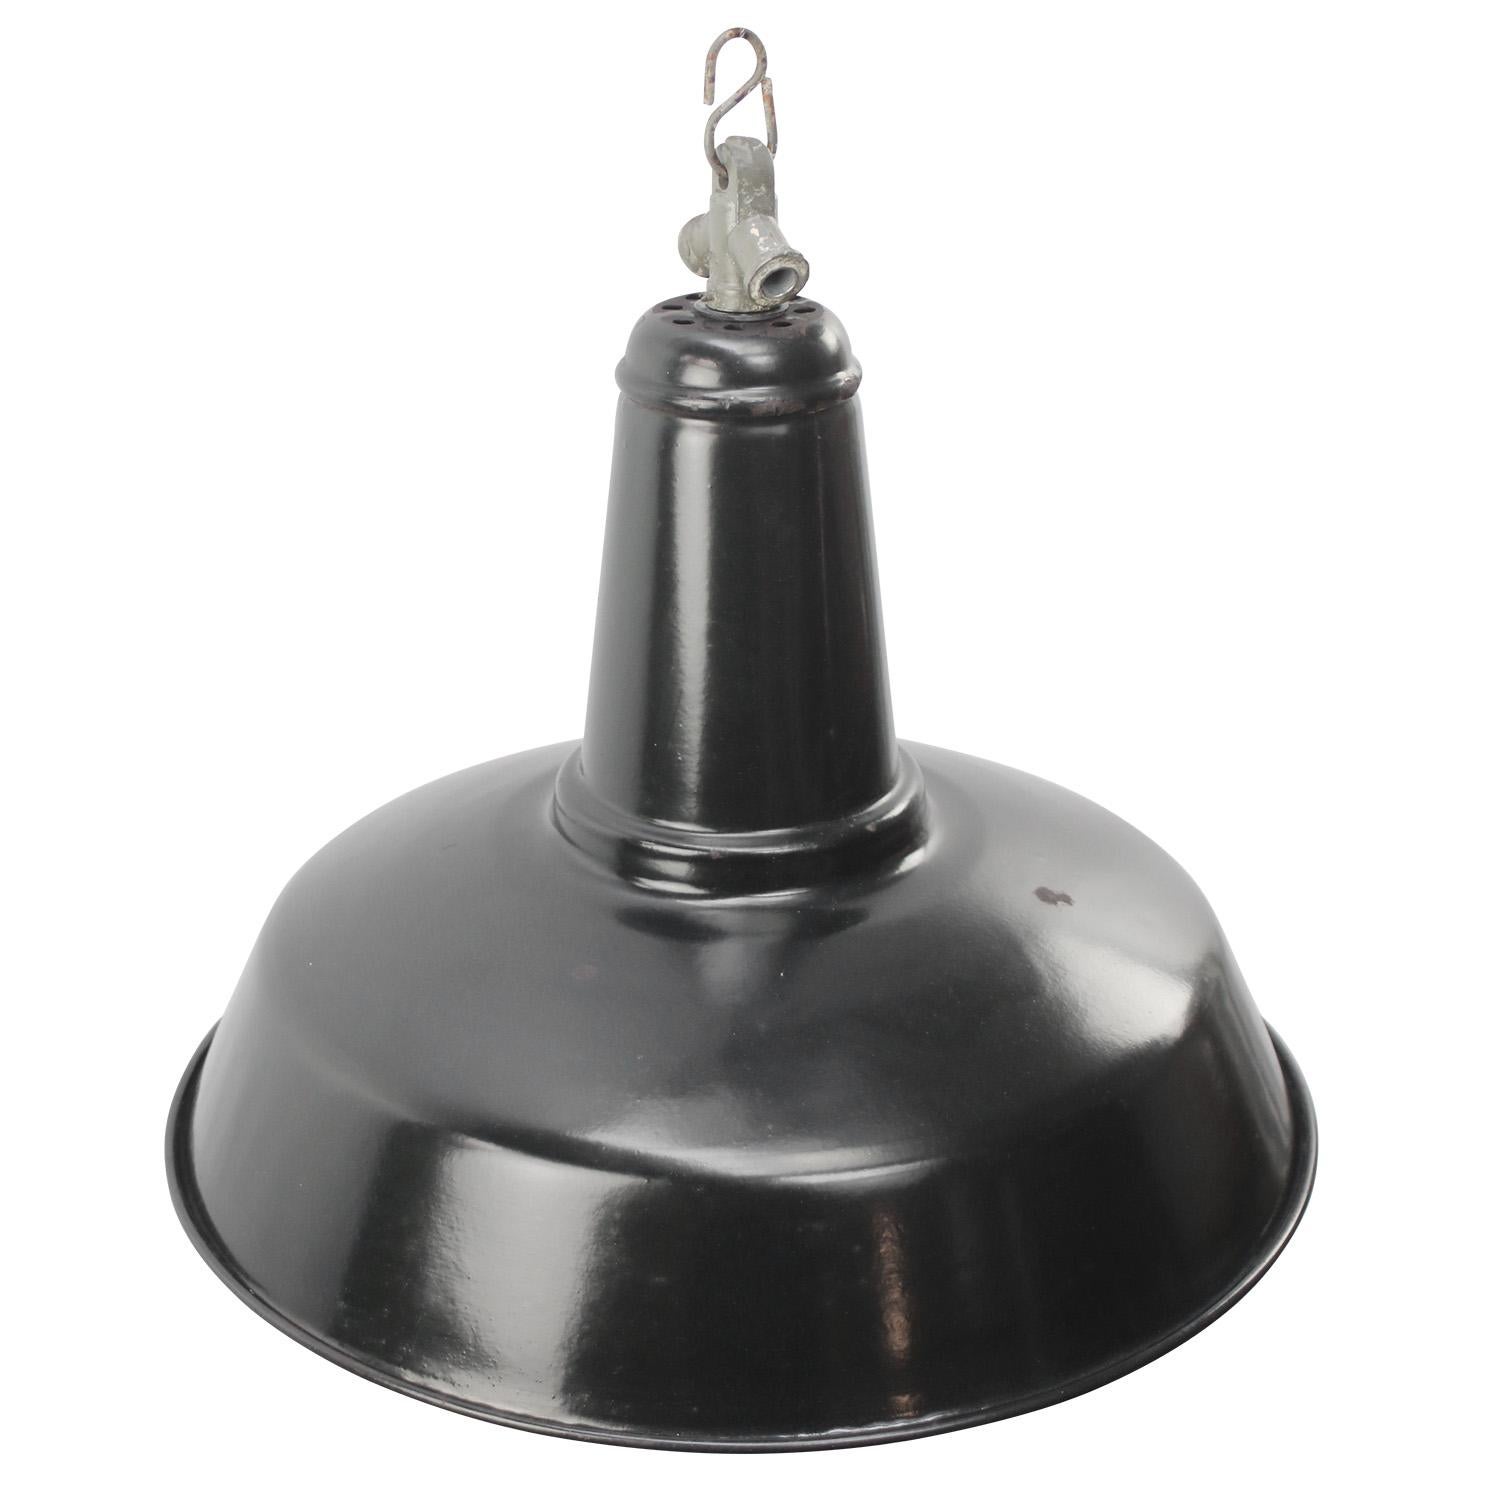 French factory pendant light
black enamel, white interior

Weight: 2.00 kg / 4.4 lb

Priced per individual item. All lamps have been made suitable by international standards for incandescent light bulbs, energy-efficient and LED bulbs. E26/E27 bulb